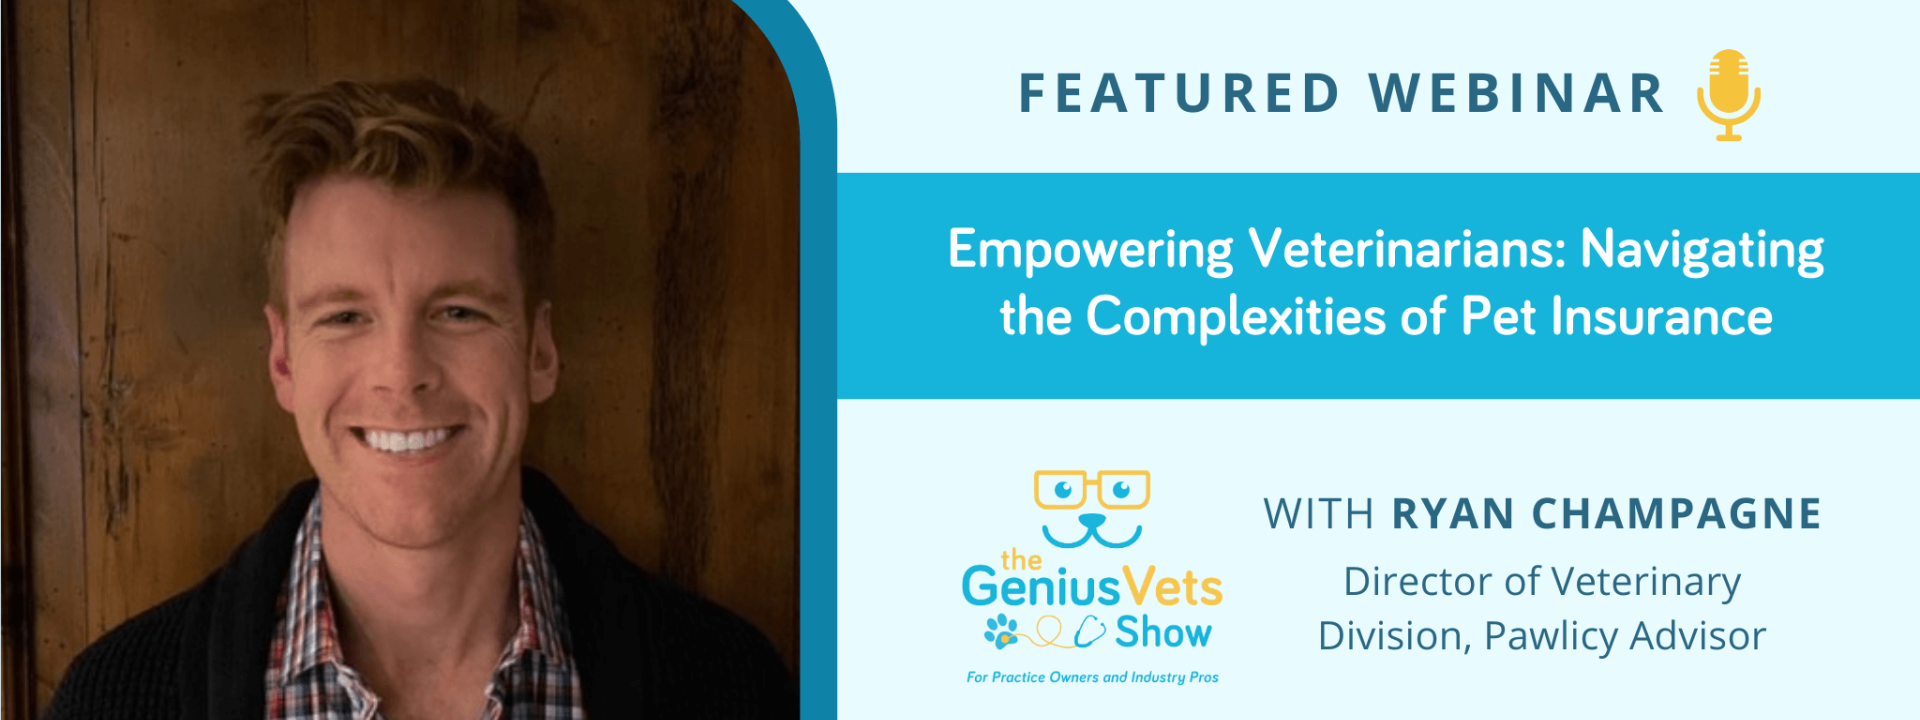 The GeniusVets Show with Ryan Champagne